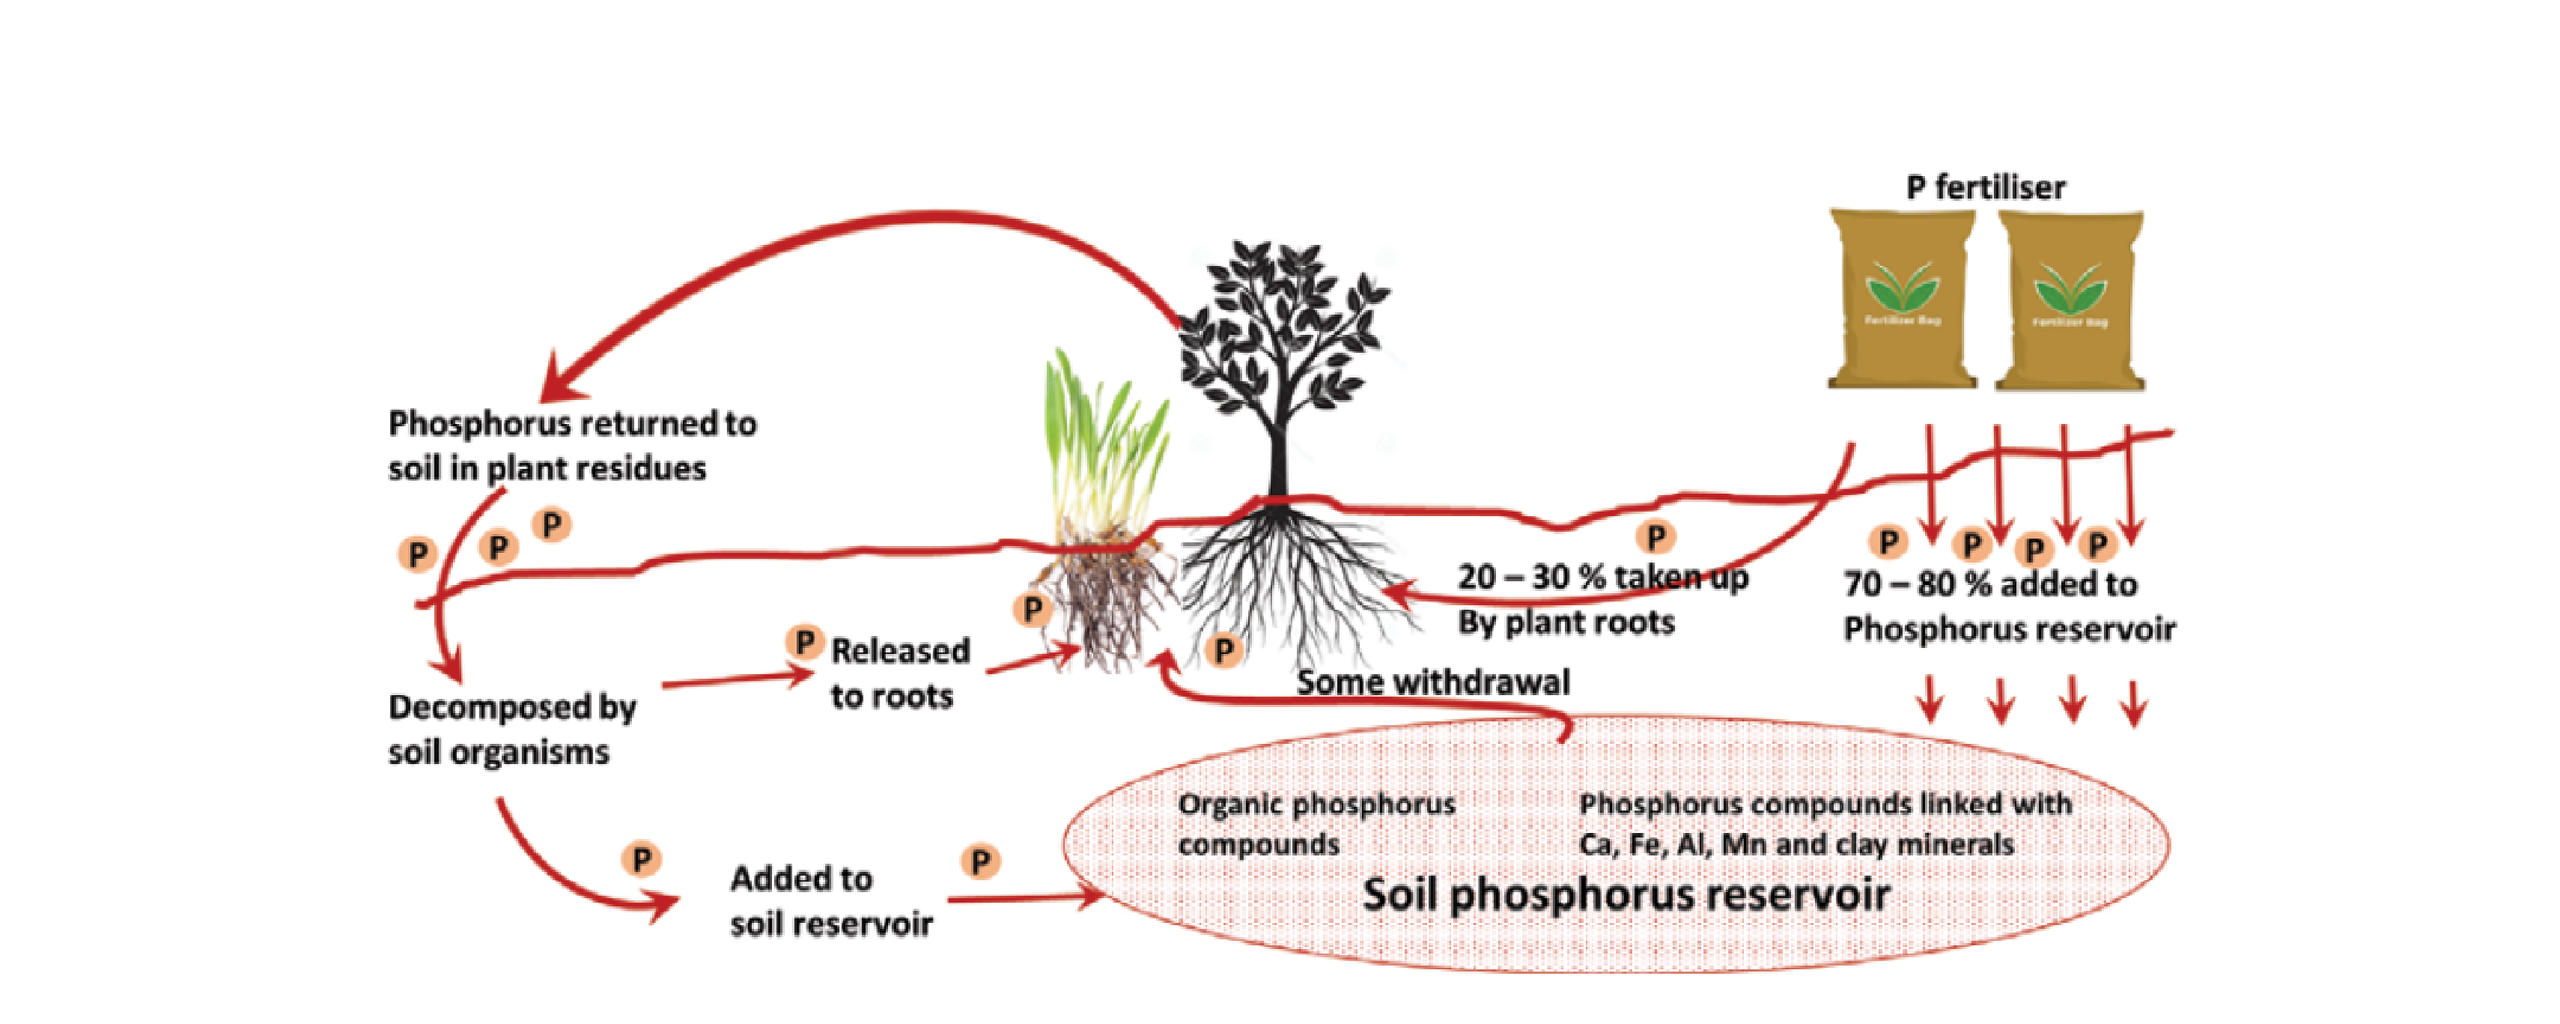 Figure 5. The phosphorus cycle in a typical cropping system is particularly complex, where movement through the soil is minimal and availability to crops is severely limited (from Glendinning 2000).